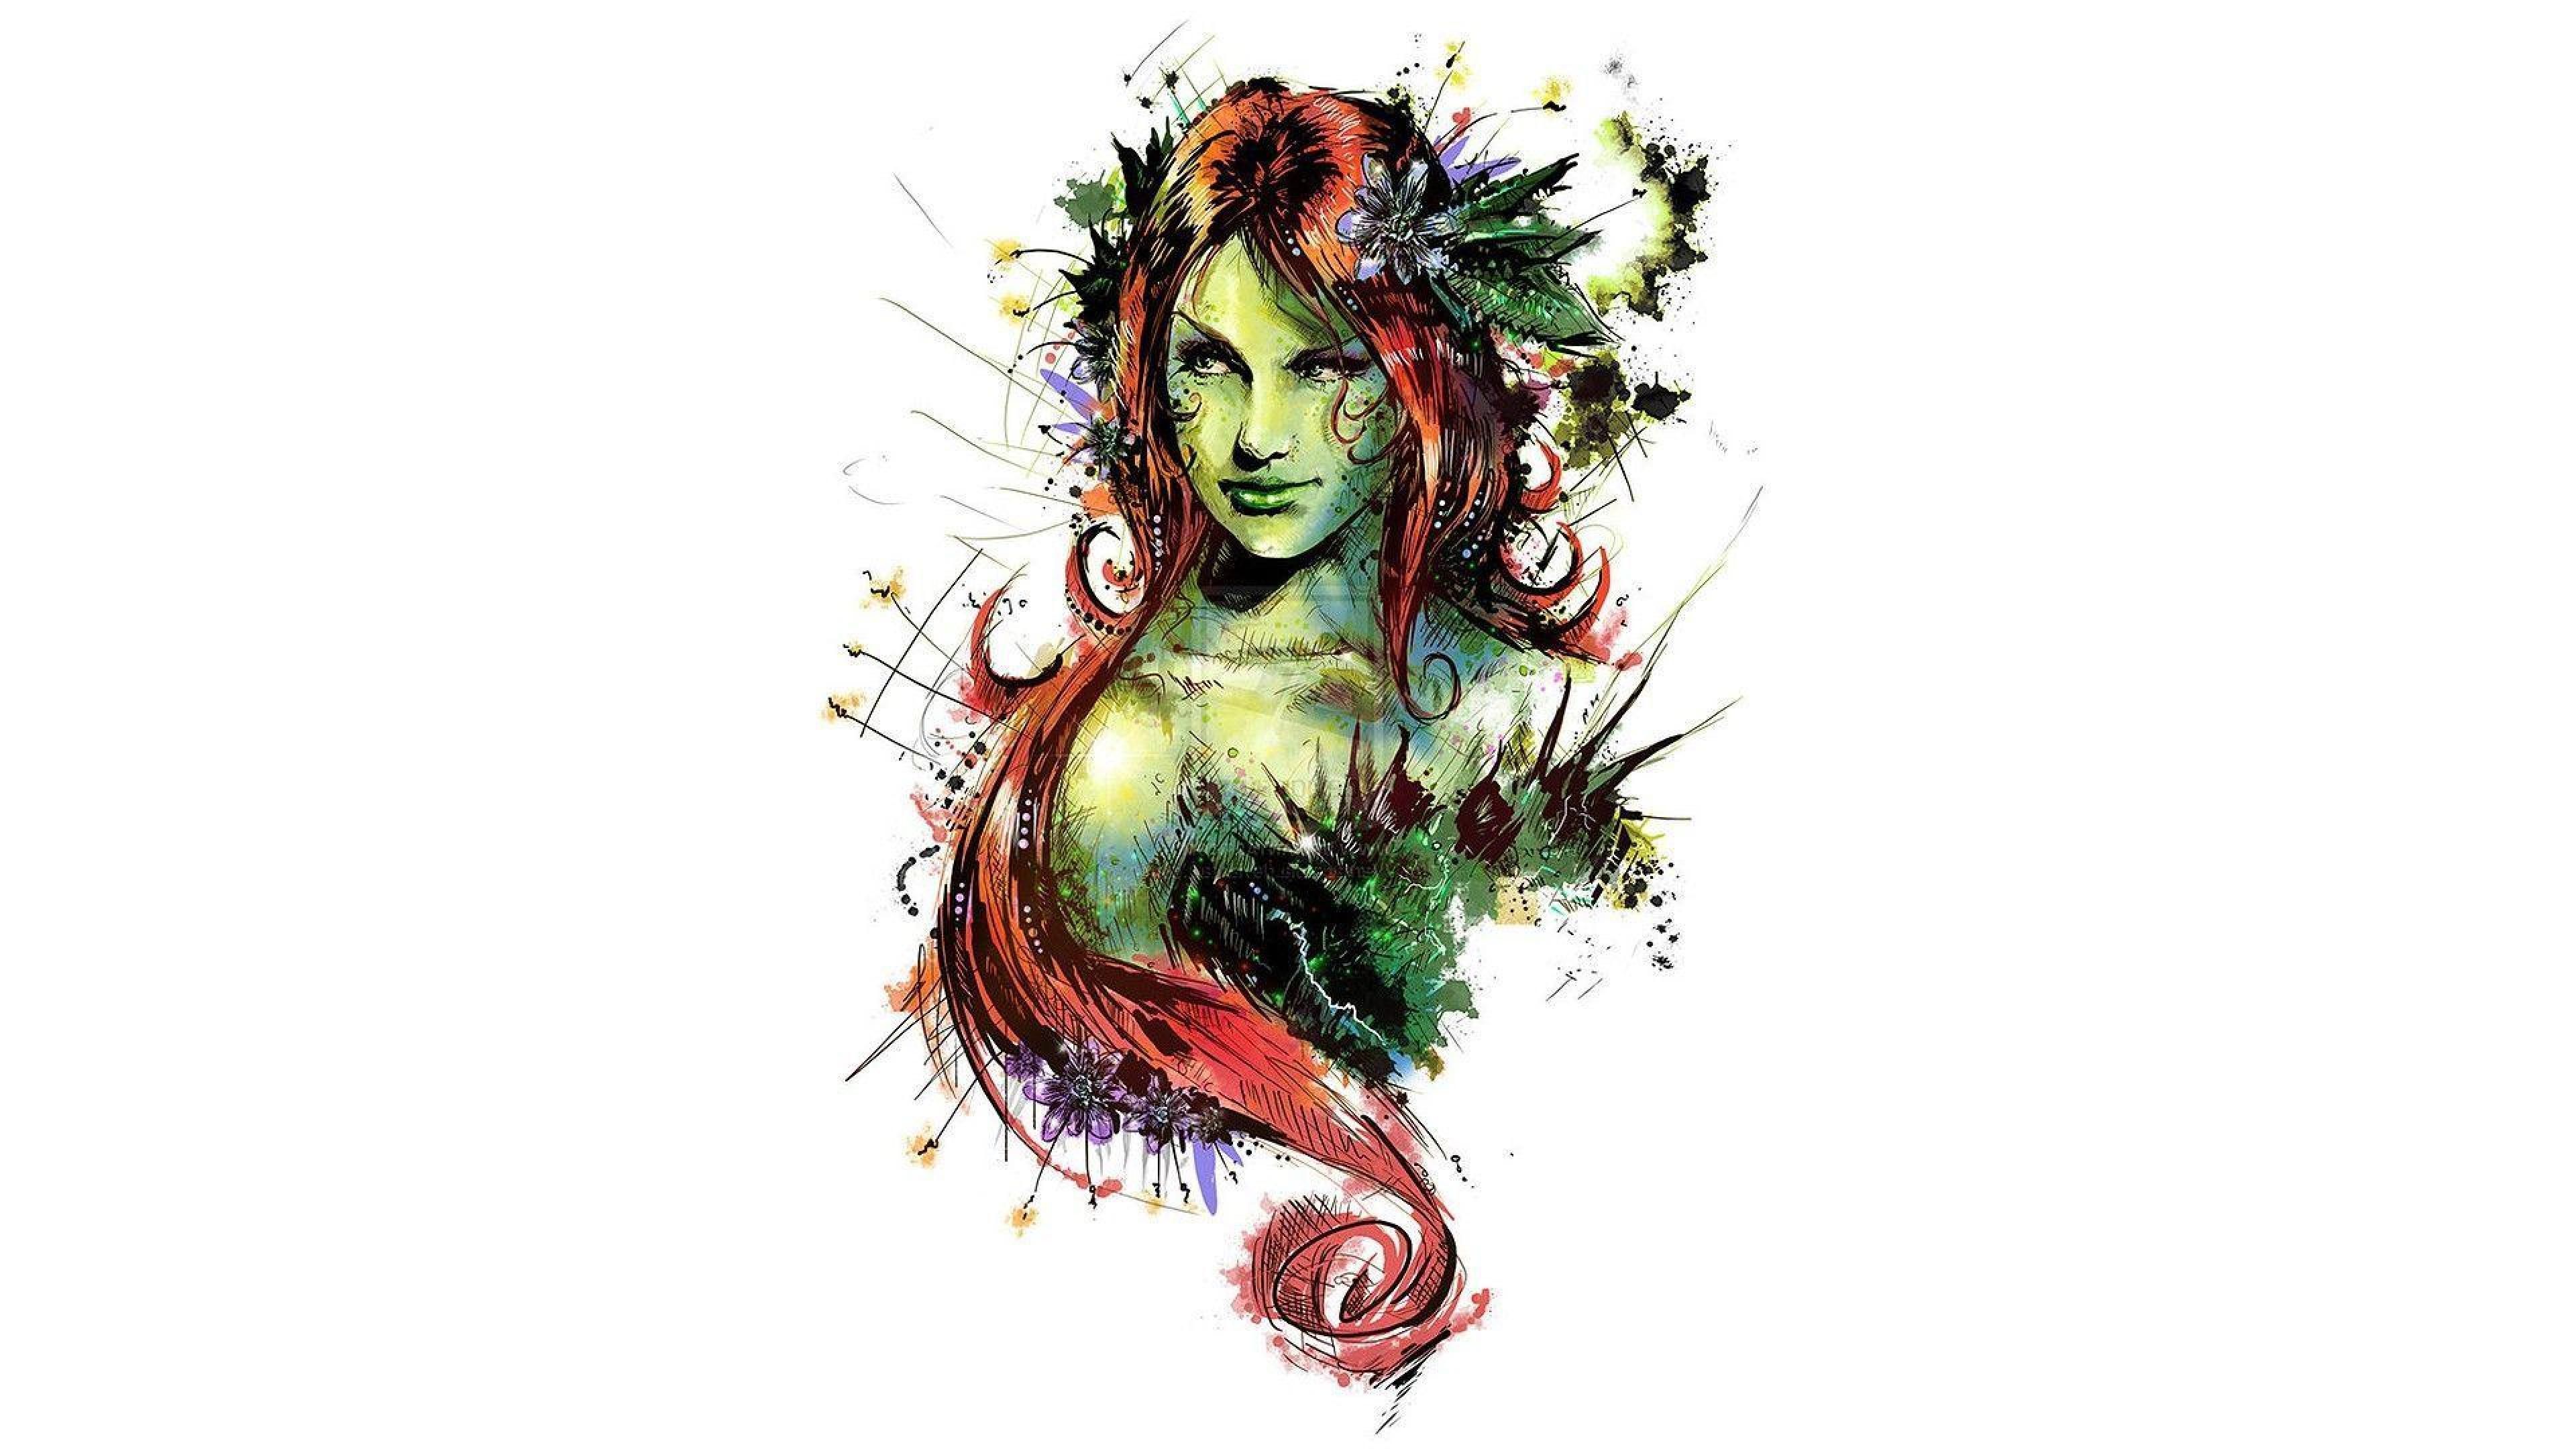 Ivy Wallpaper. Lily Ivy Wallpaper, Poison Ivy Arkham Wallpaper and Poison Ivy Wallpaper